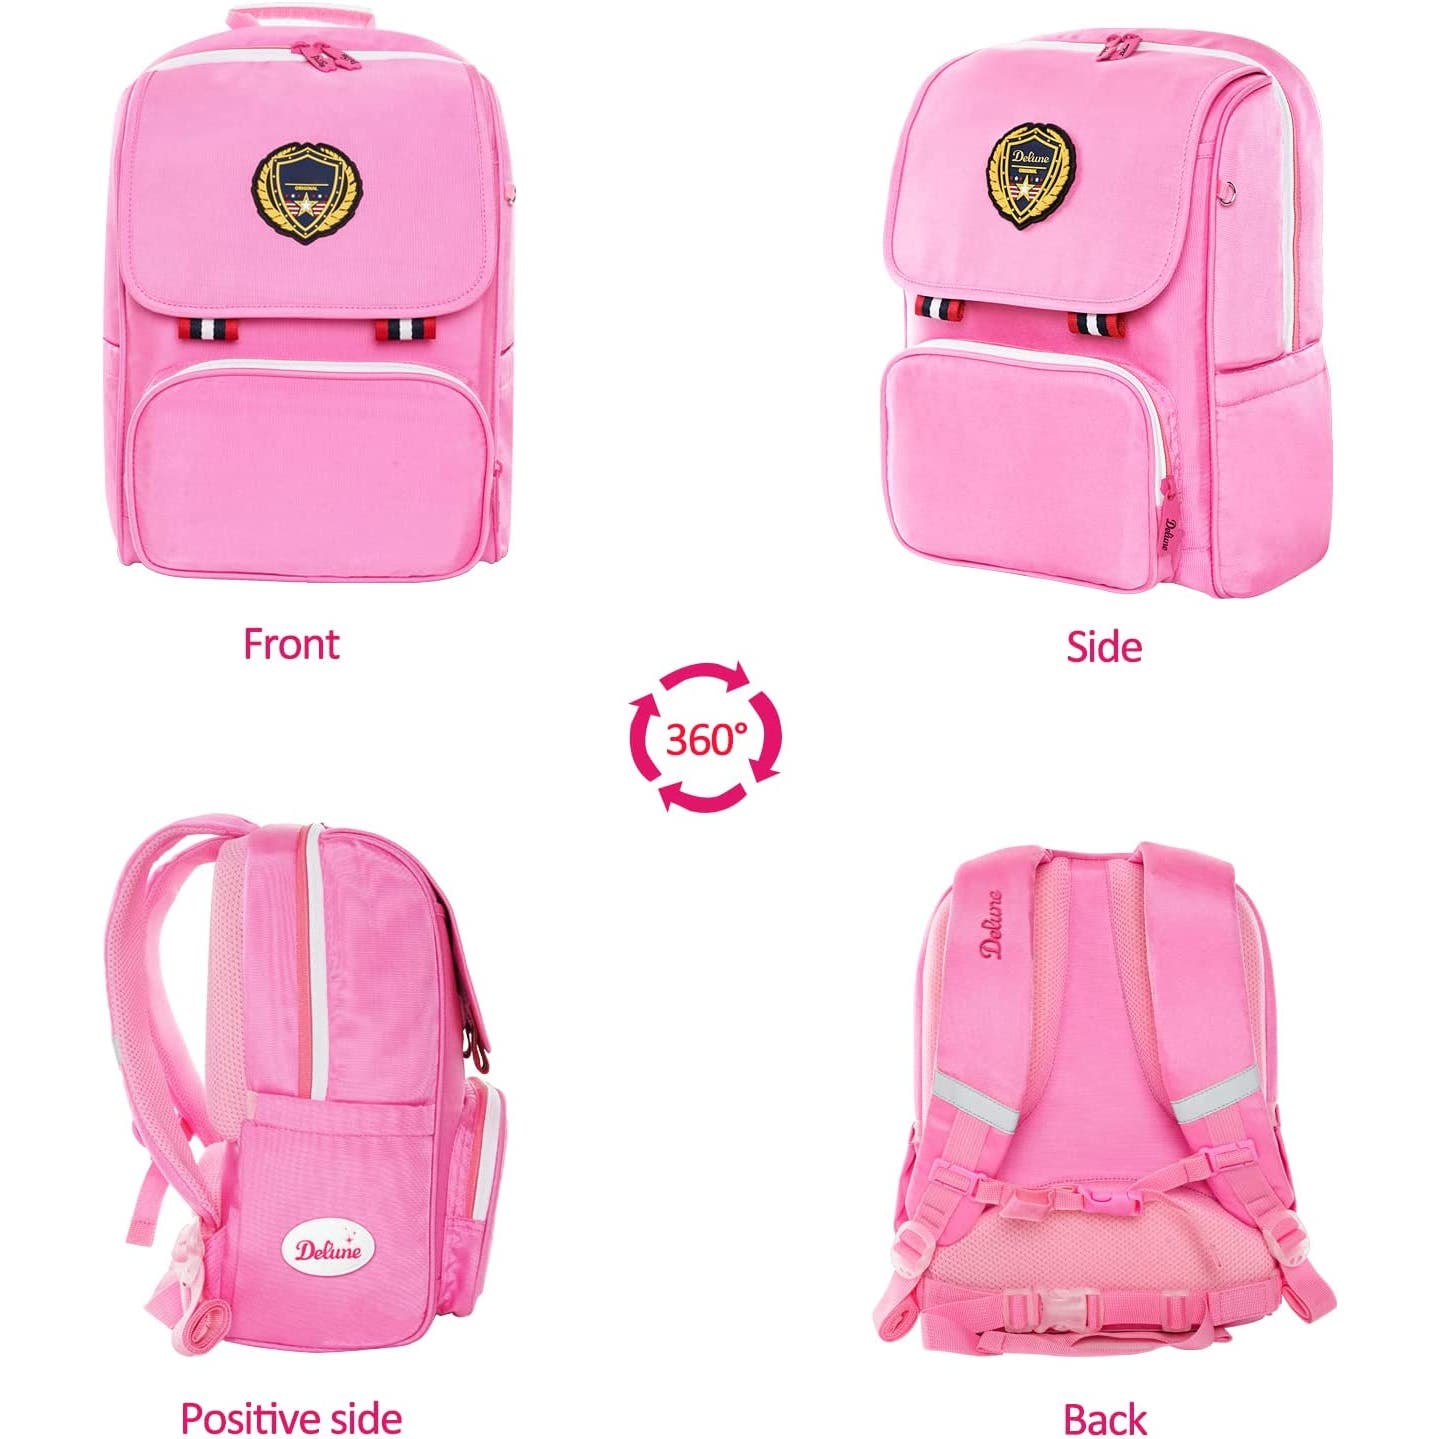 SALE!!! DELUNE Pink Backpack LIGHT Weight with Pencil Case - ORTHOPEDIC